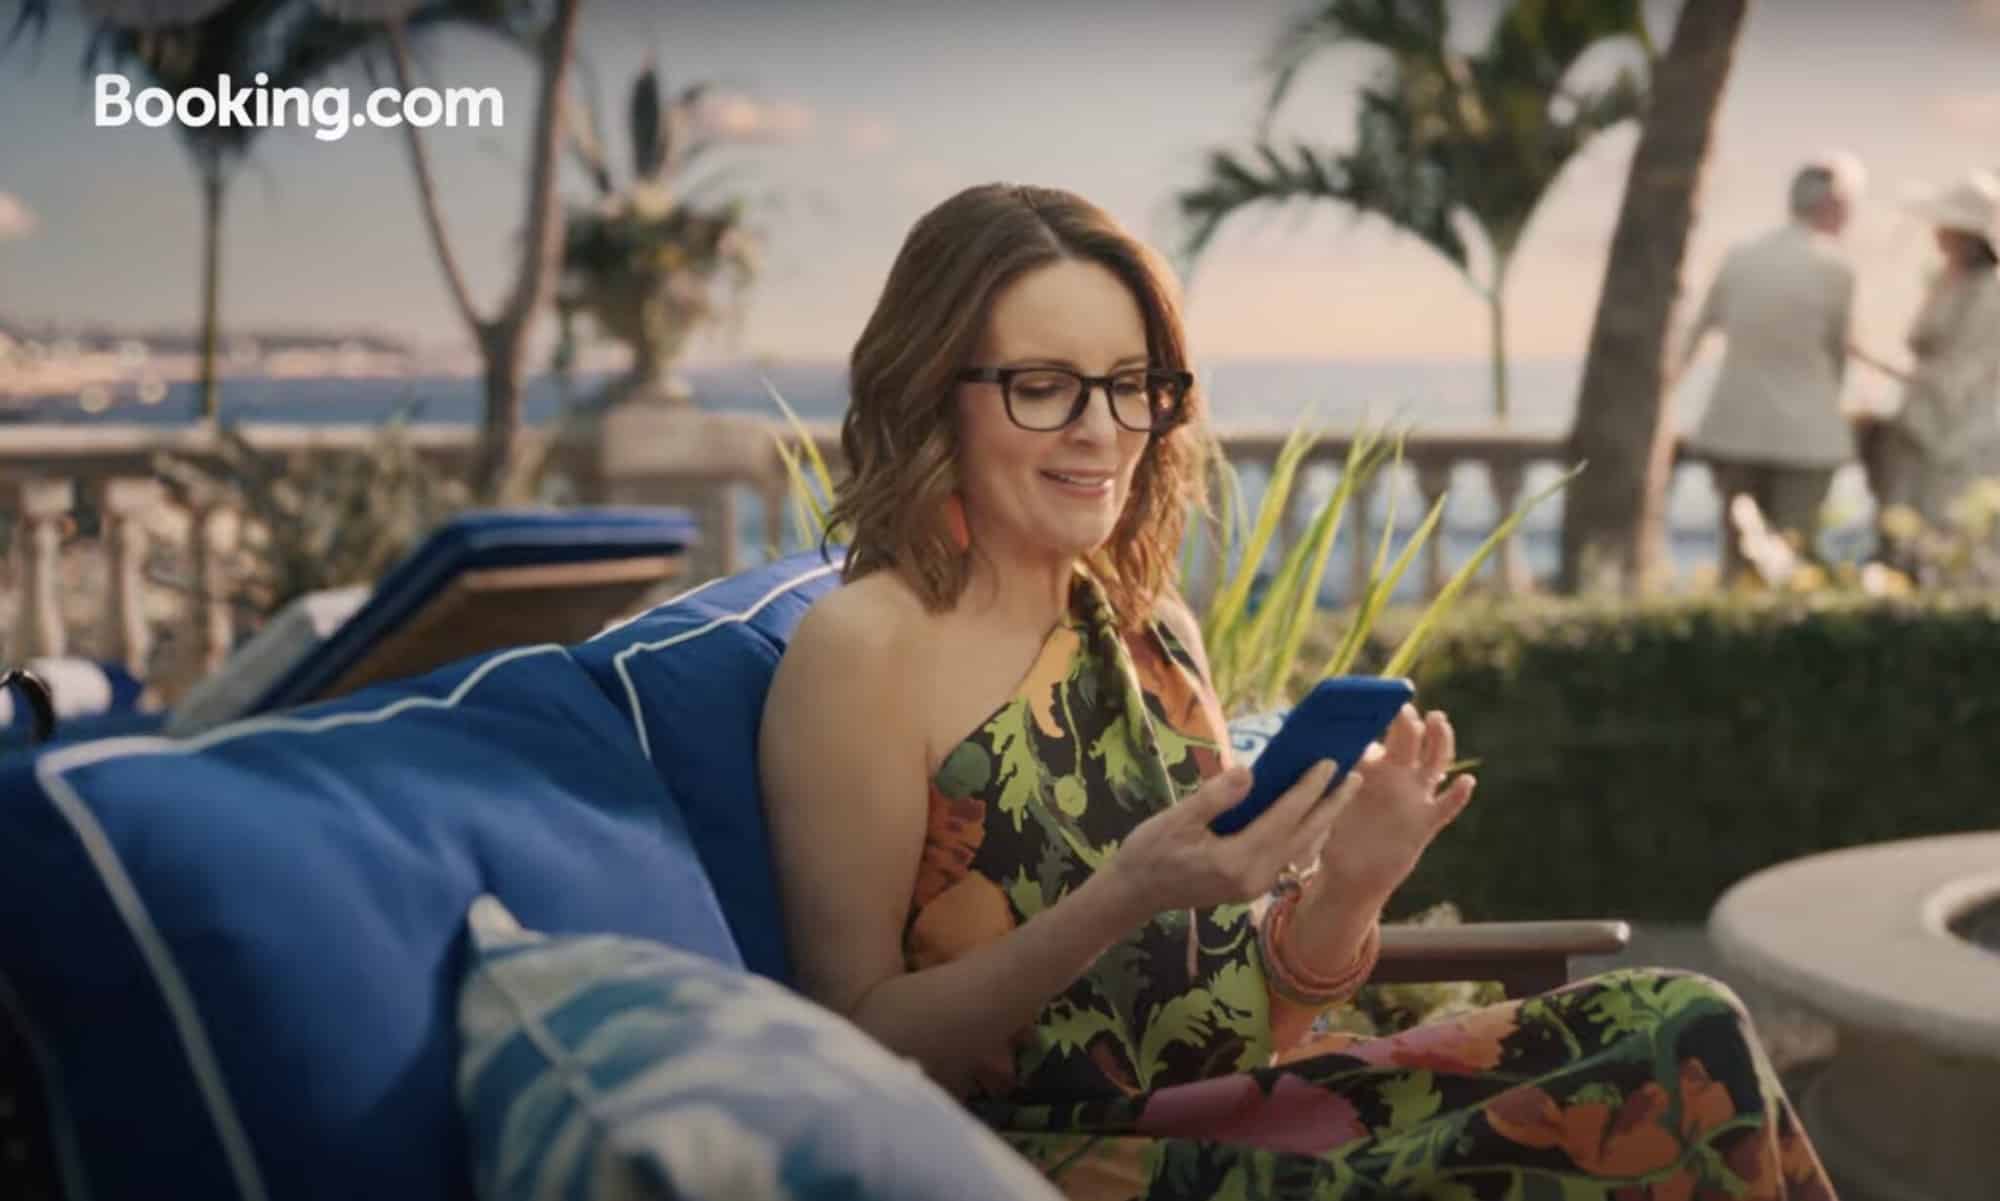 Booking.com Super Bowl Ad: A Masterclass in Branding and Storytelling